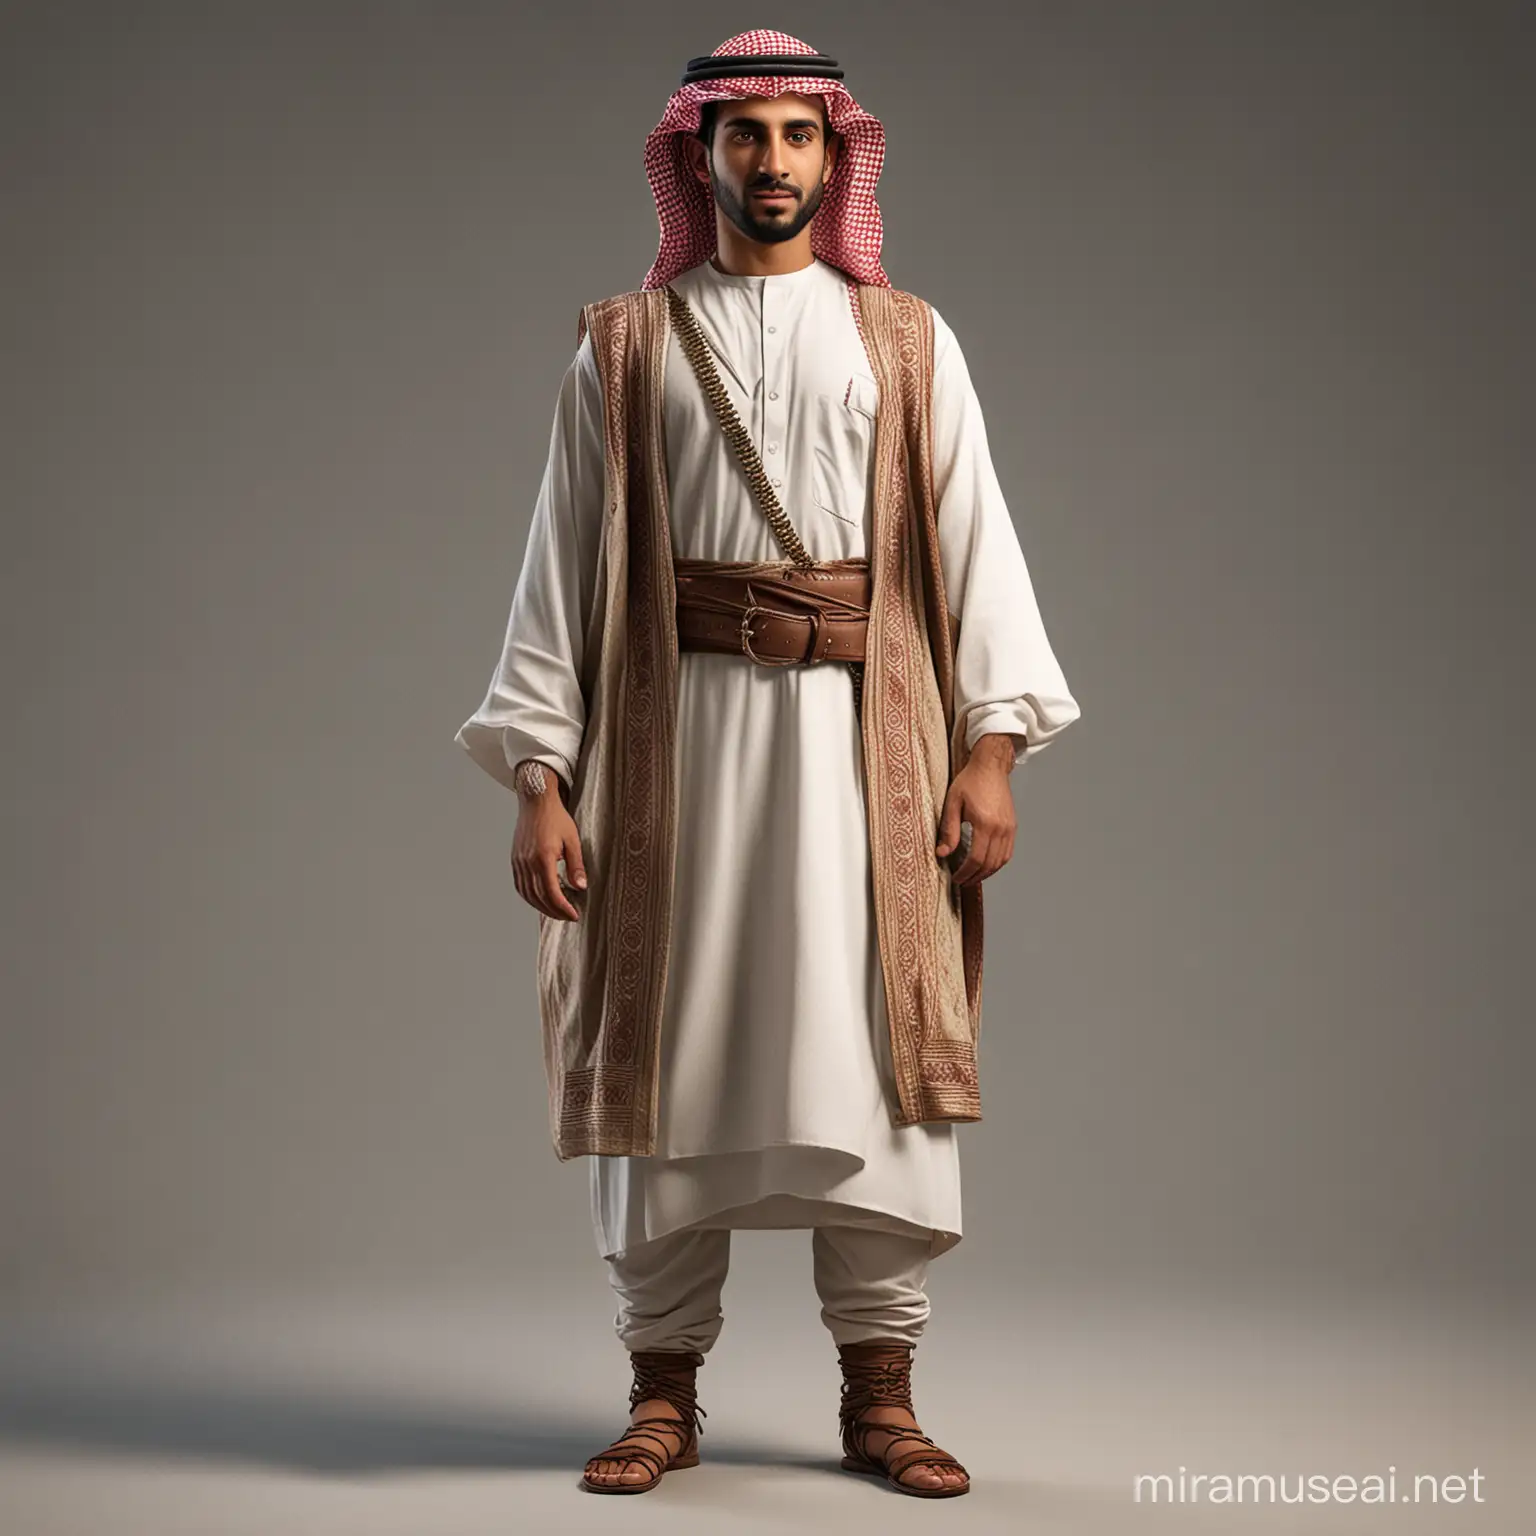 Create a 3D realistic character of a Saudi man in local traditional wear. the image should be full length from head to toe with plain backround
